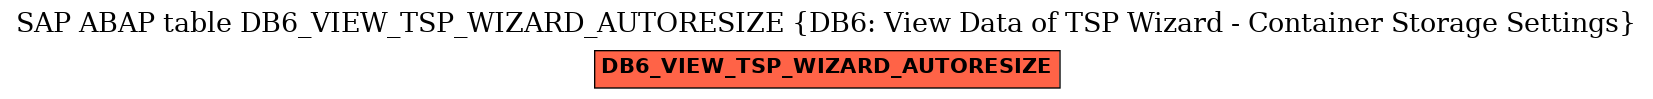 E-R Diagram for table DB6_VIEW_TSP_WIZARD_AUTORESIZE (DB6: View Data of TSP Wizard - Container Storage Settings)